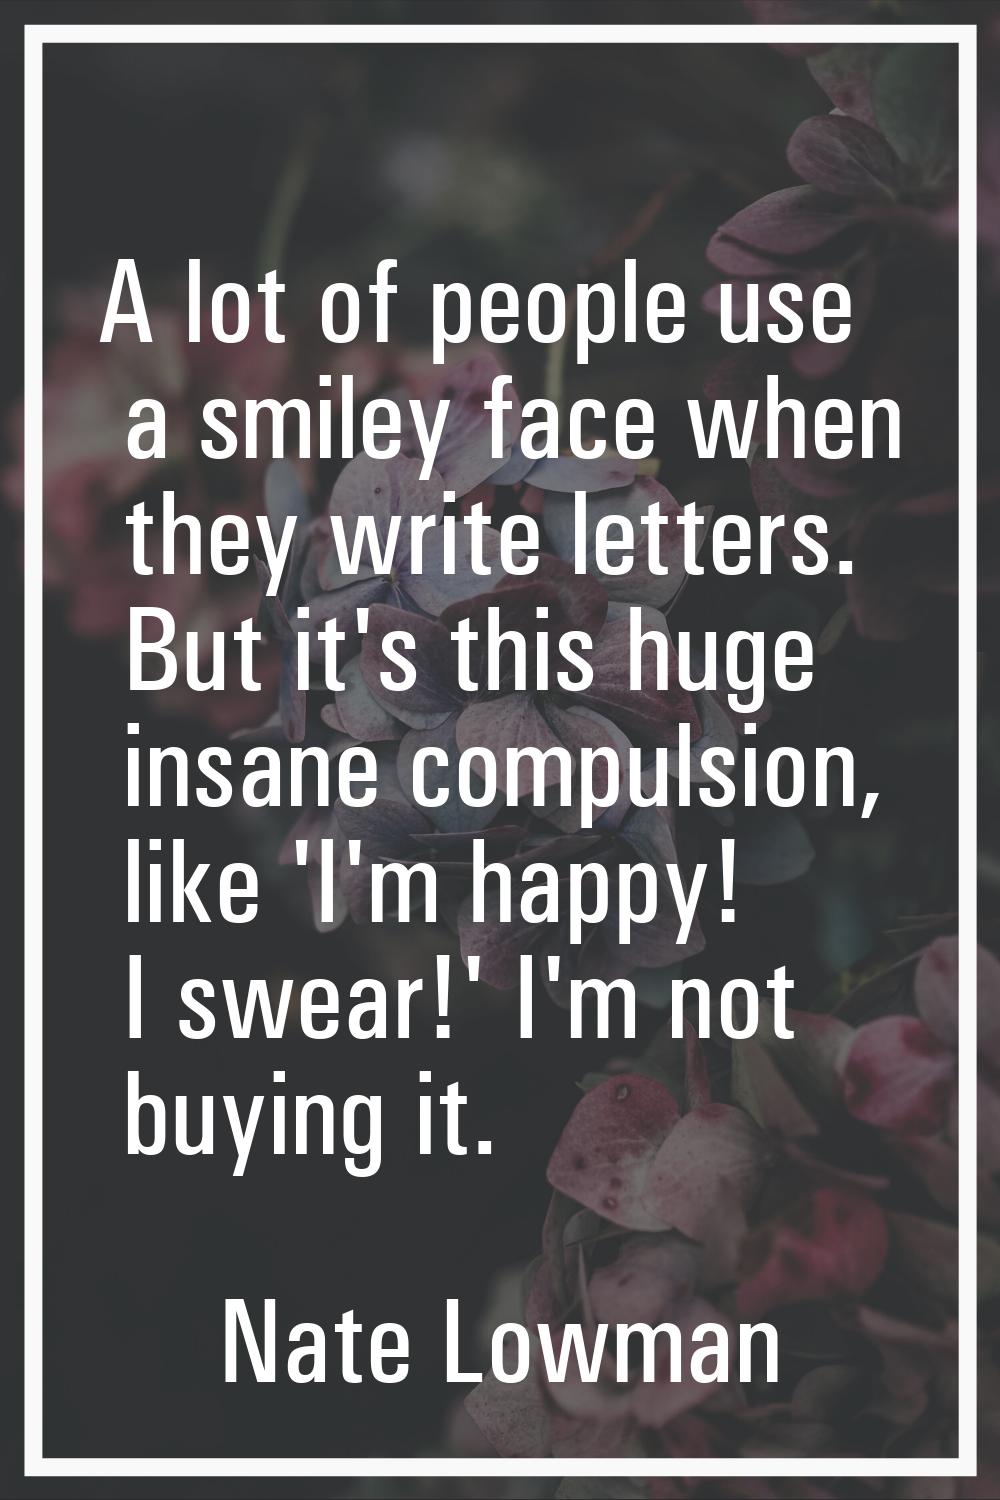 A lot of people use a smiley face when they write letters. But it's this huge insane compulsion, li